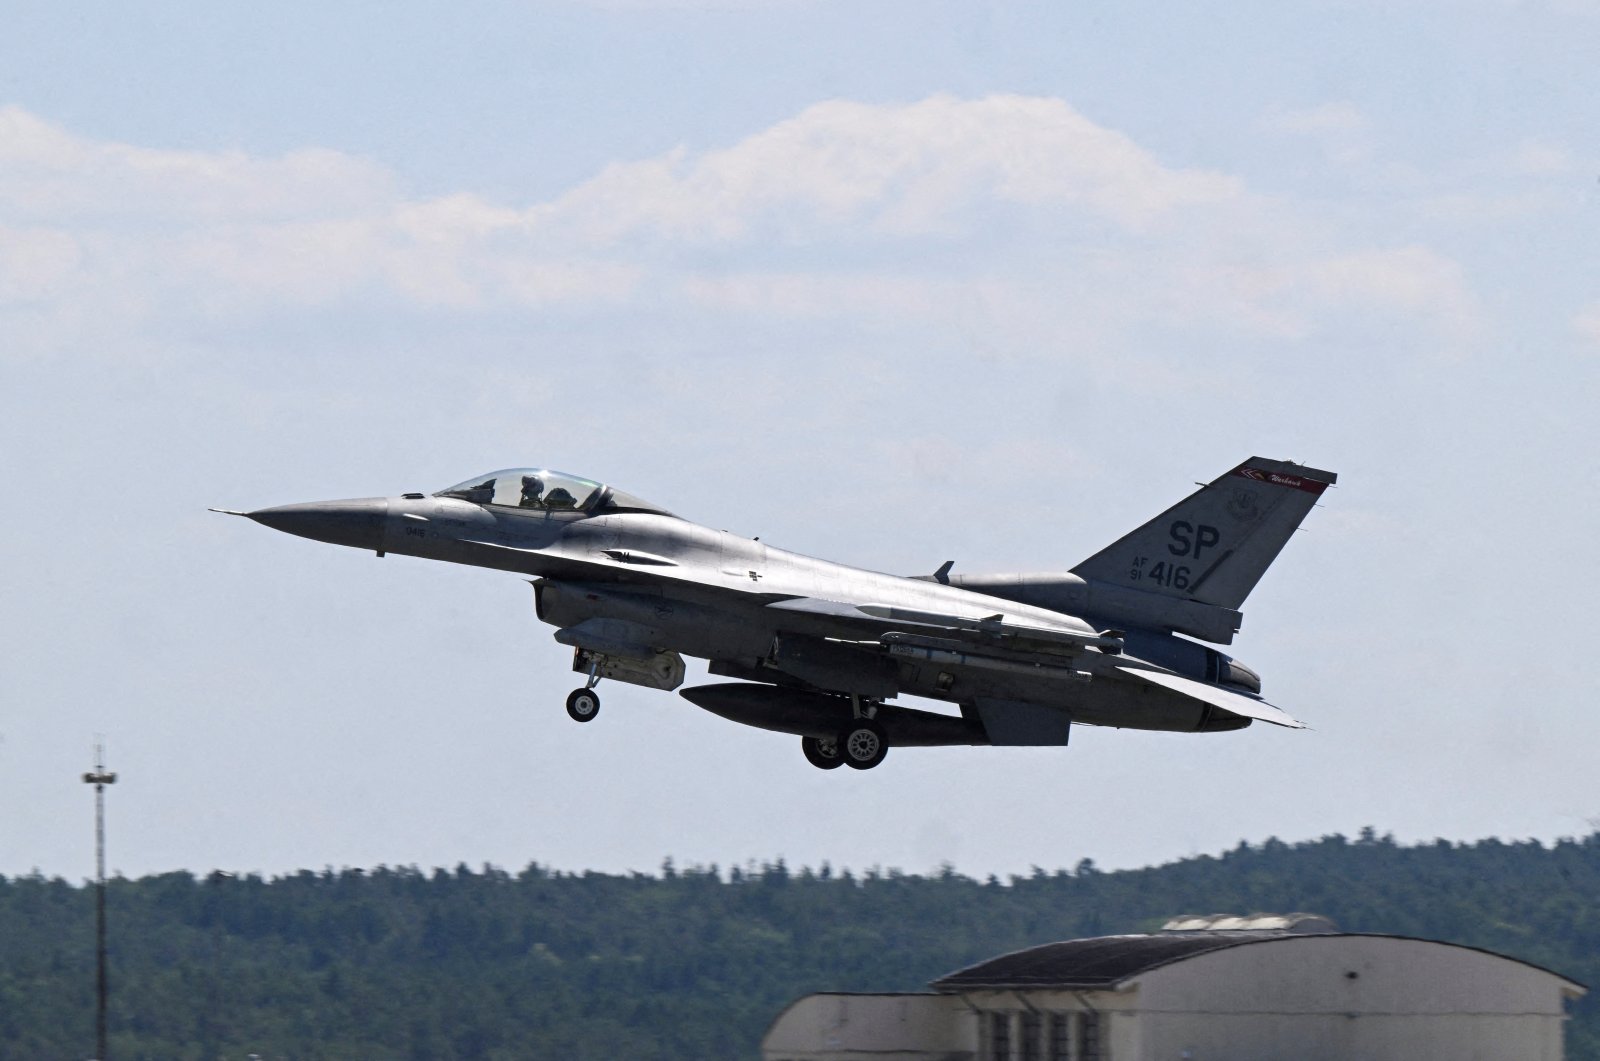 An F-16 fighter jet takes off during a media day of NATO&#039;s &quot;Air Defender 23&quot; military exercise at Spangdahlem U.S. Air Base near the German-Belgian border, Germany, June 14, 2023. (Reuters File Photo)